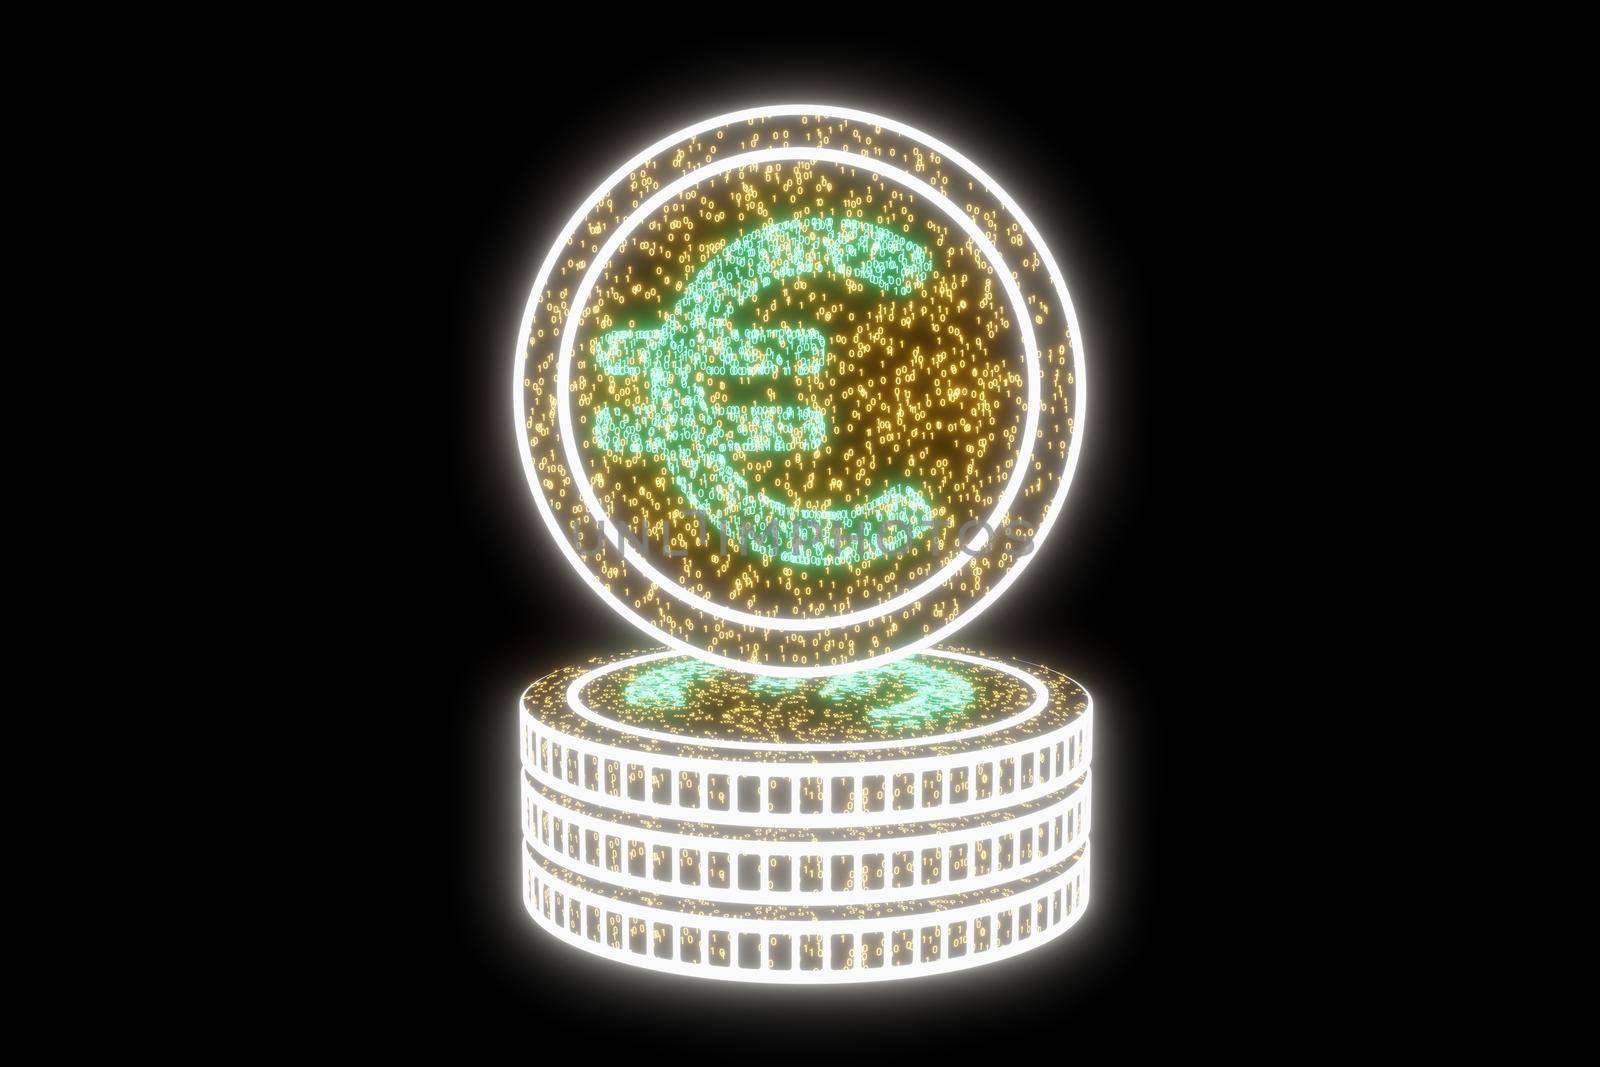 Digital currency euro. Euro finance stock trading exchange concept. Businessman touched eur currency icon on virtual financial screen. World money trade market technology by galitskaya